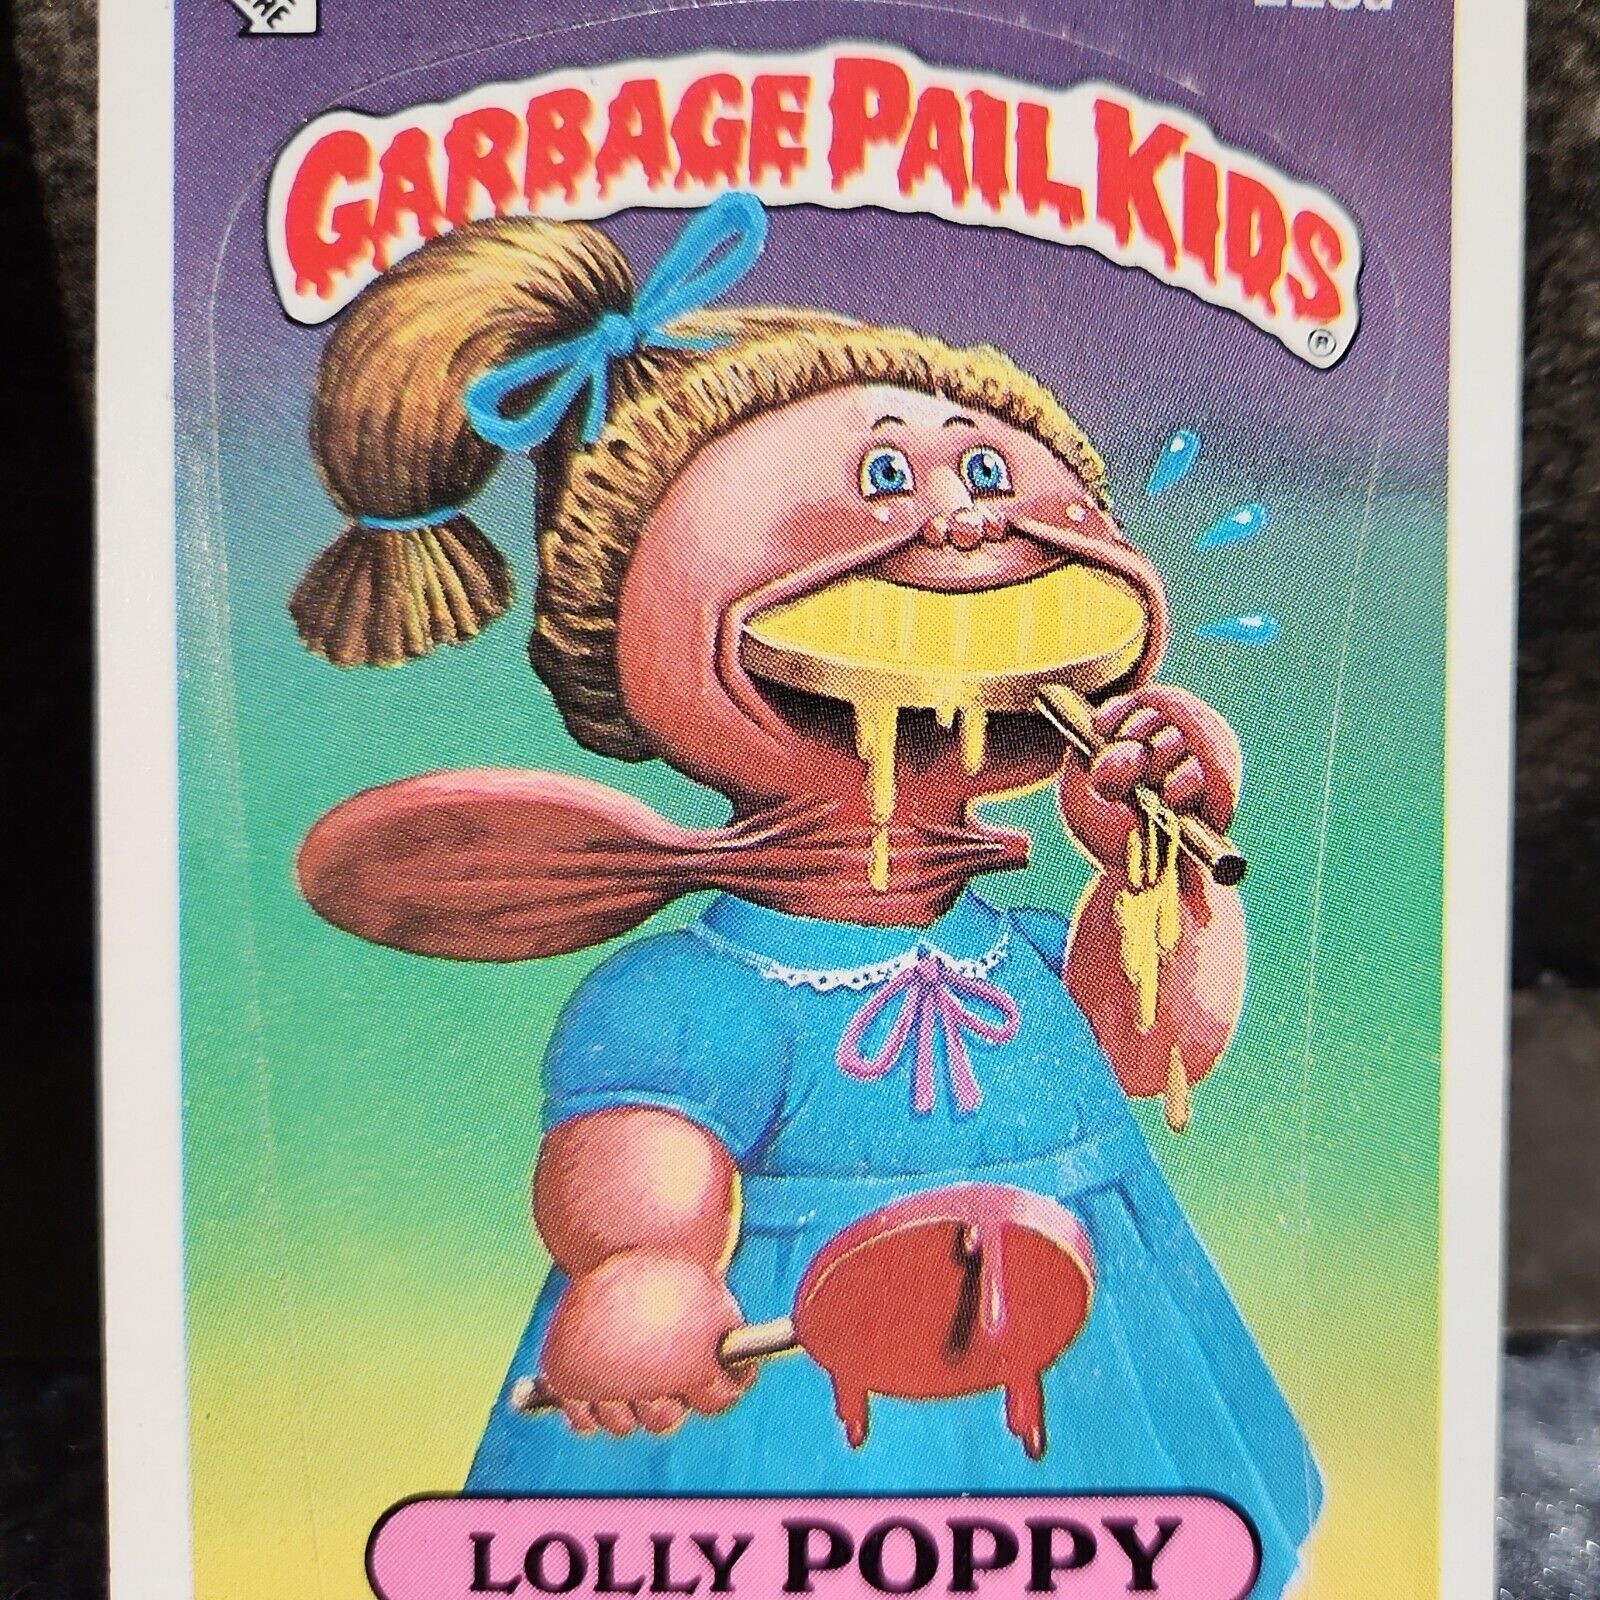 2x Lolly Poppy VTG 1986 Topps Garbage Pail Kids #223a Trading Cards